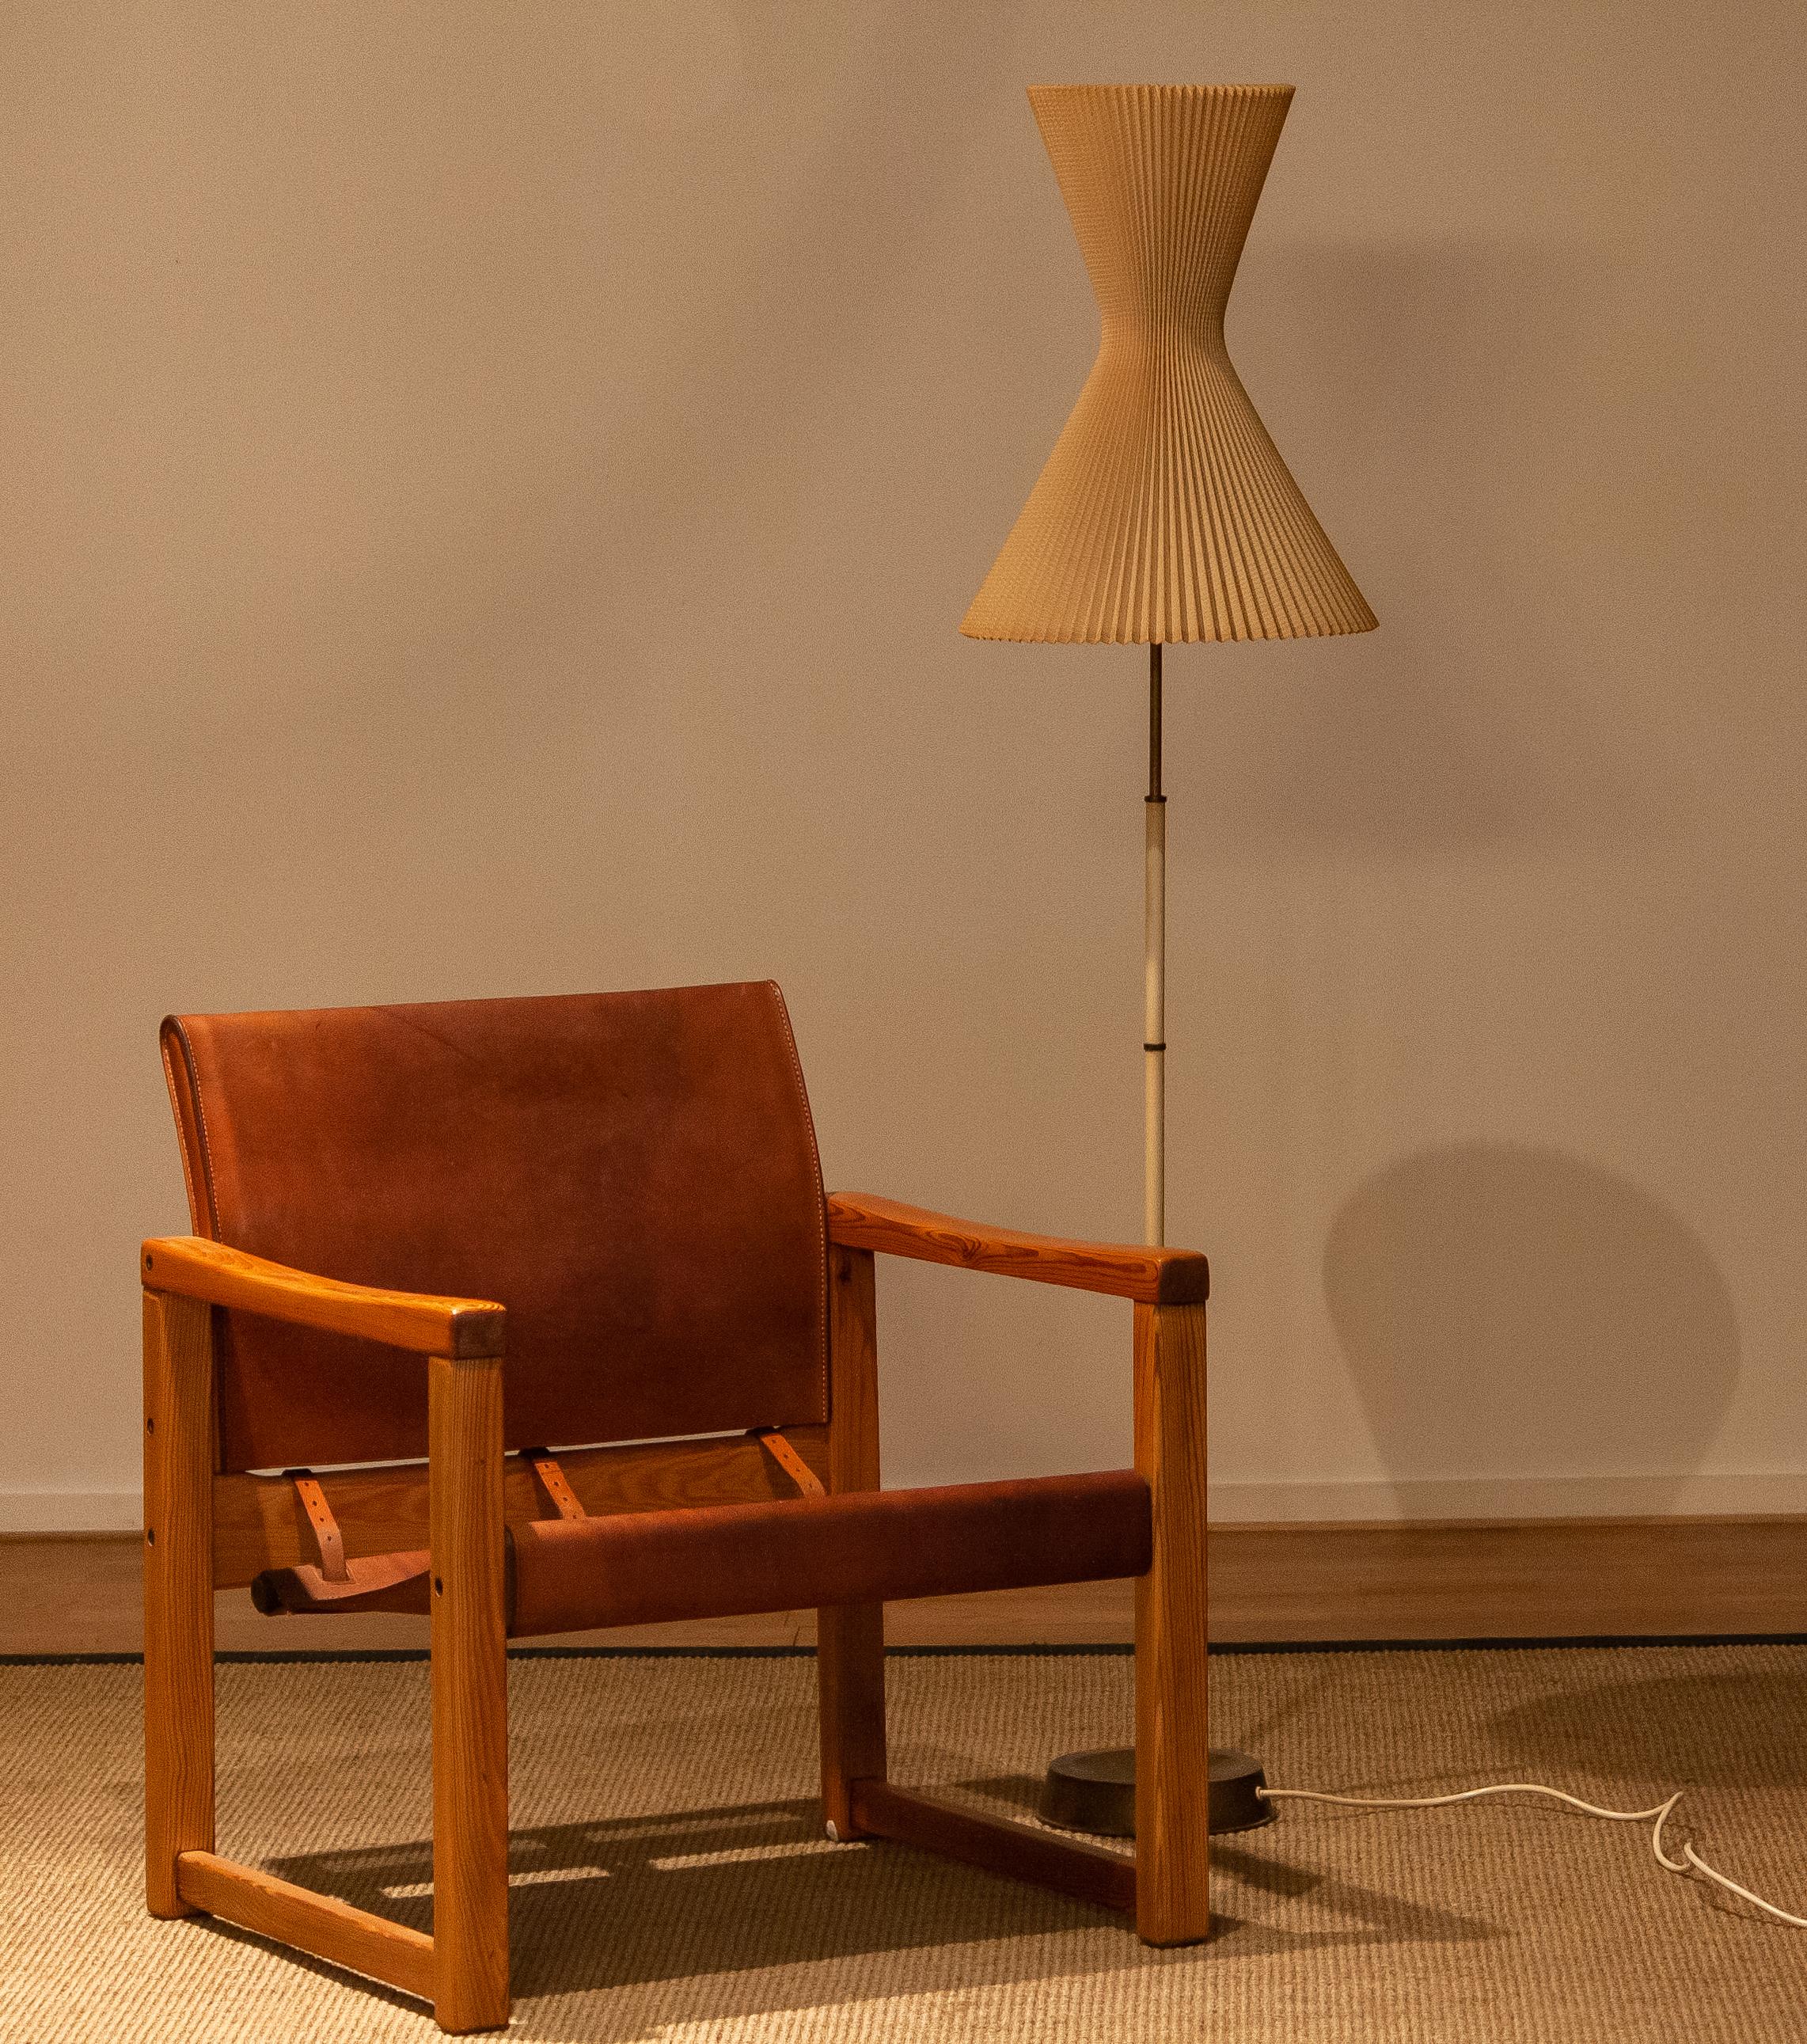 French 1950s Slim German Floor Lamp Made of Brass with Large Cotton Diabolo Shade